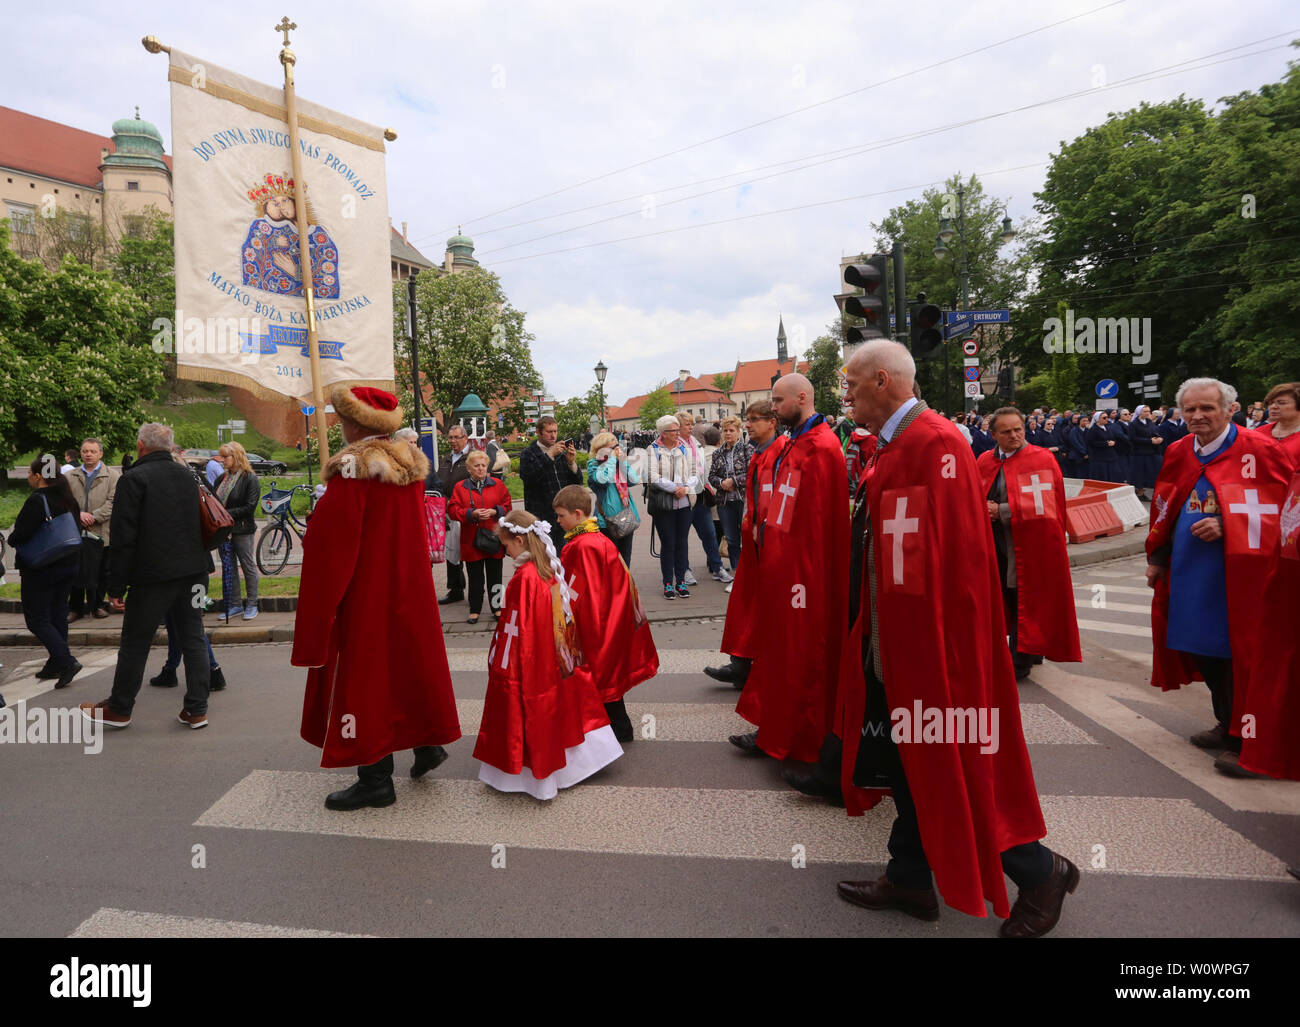 Krakow. Cracow. Poland. St. Stanislaw procession from Wawel Royal Castle to Skalka Church. Members of the Jesus the King of Poland brotherhood. Stock Photo